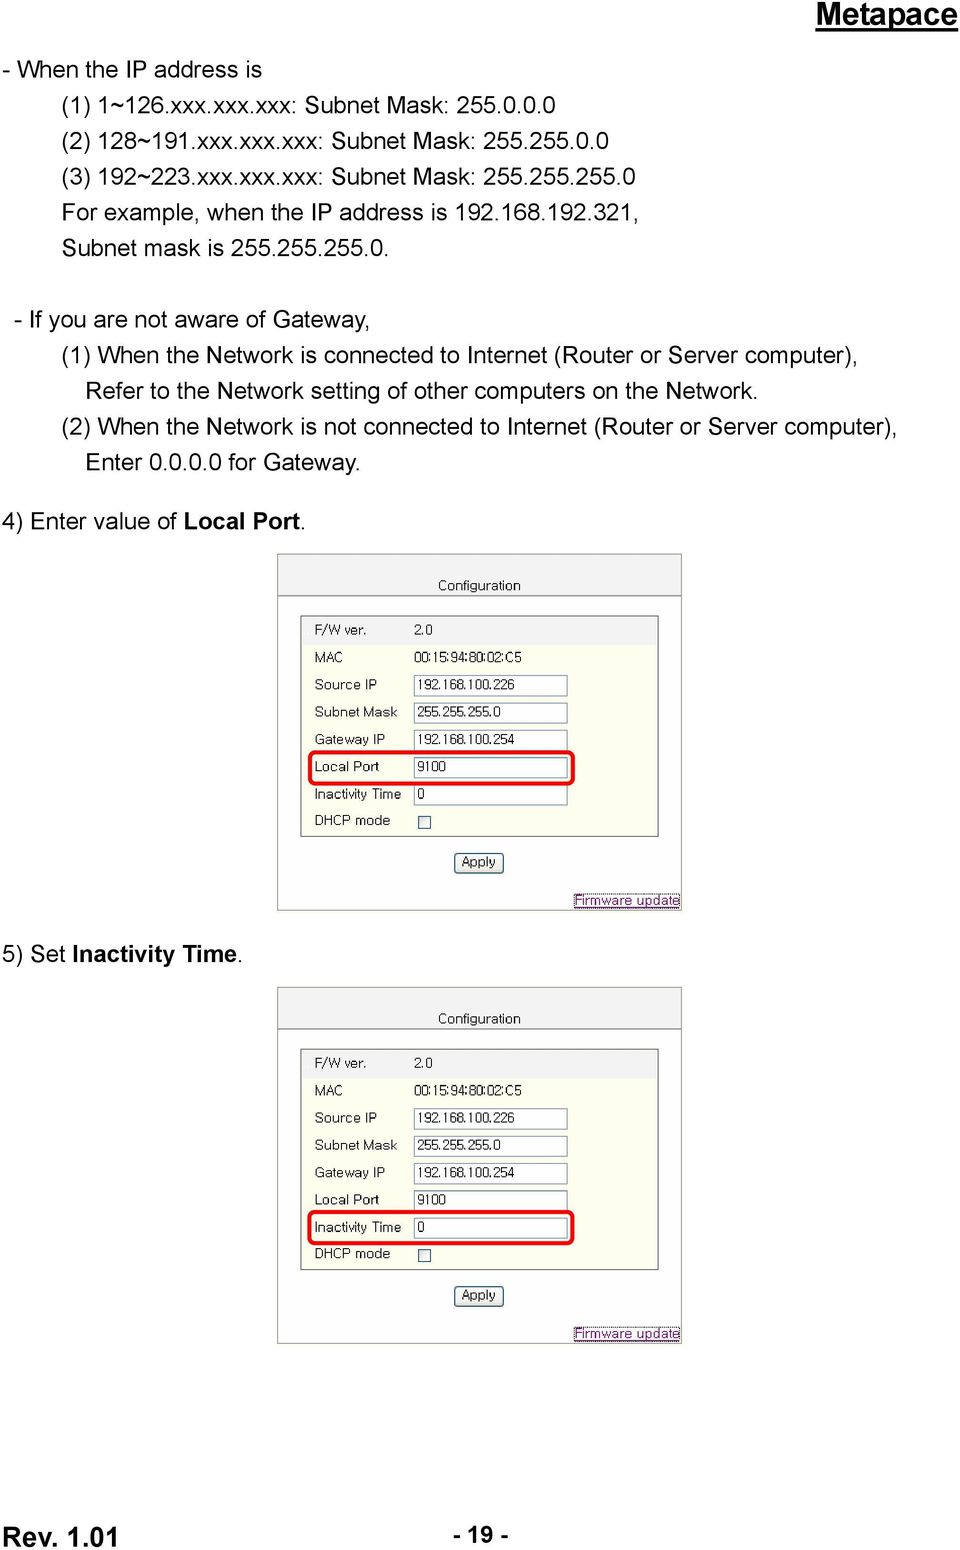 - If you are not aware of Gateway, (1) When the Network is connected to Internet (Router or Server computer), Refer to the Network setting of other